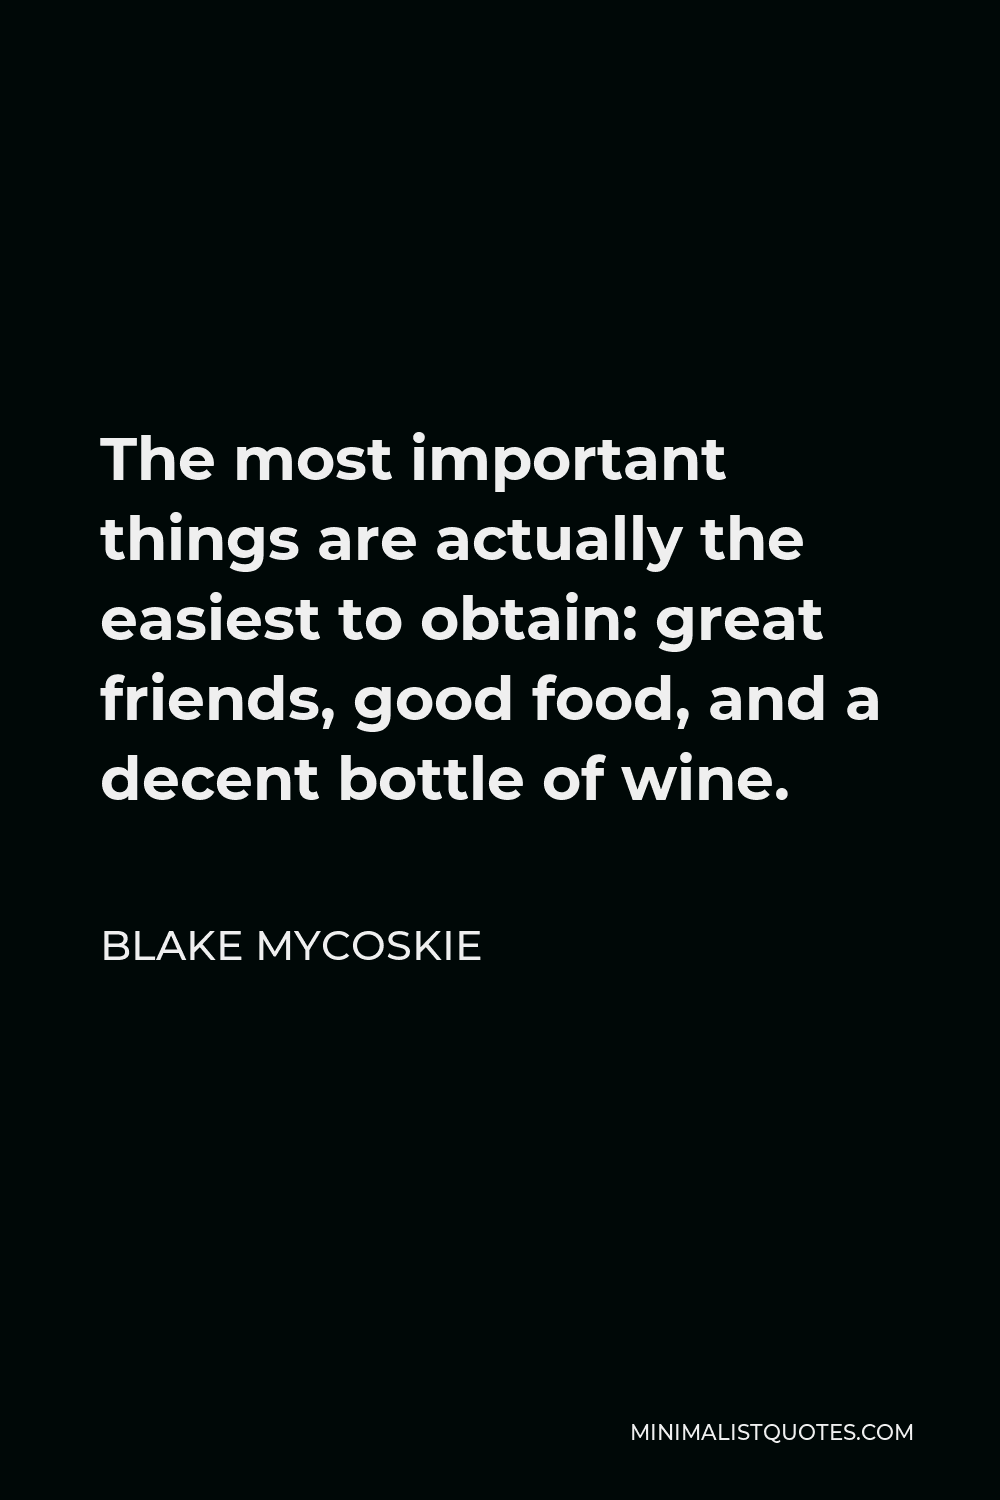 Blake Mycoskie Quote - The most important things are actually the easiest to obtain: great friends, good food, and a decent bottle of wine.